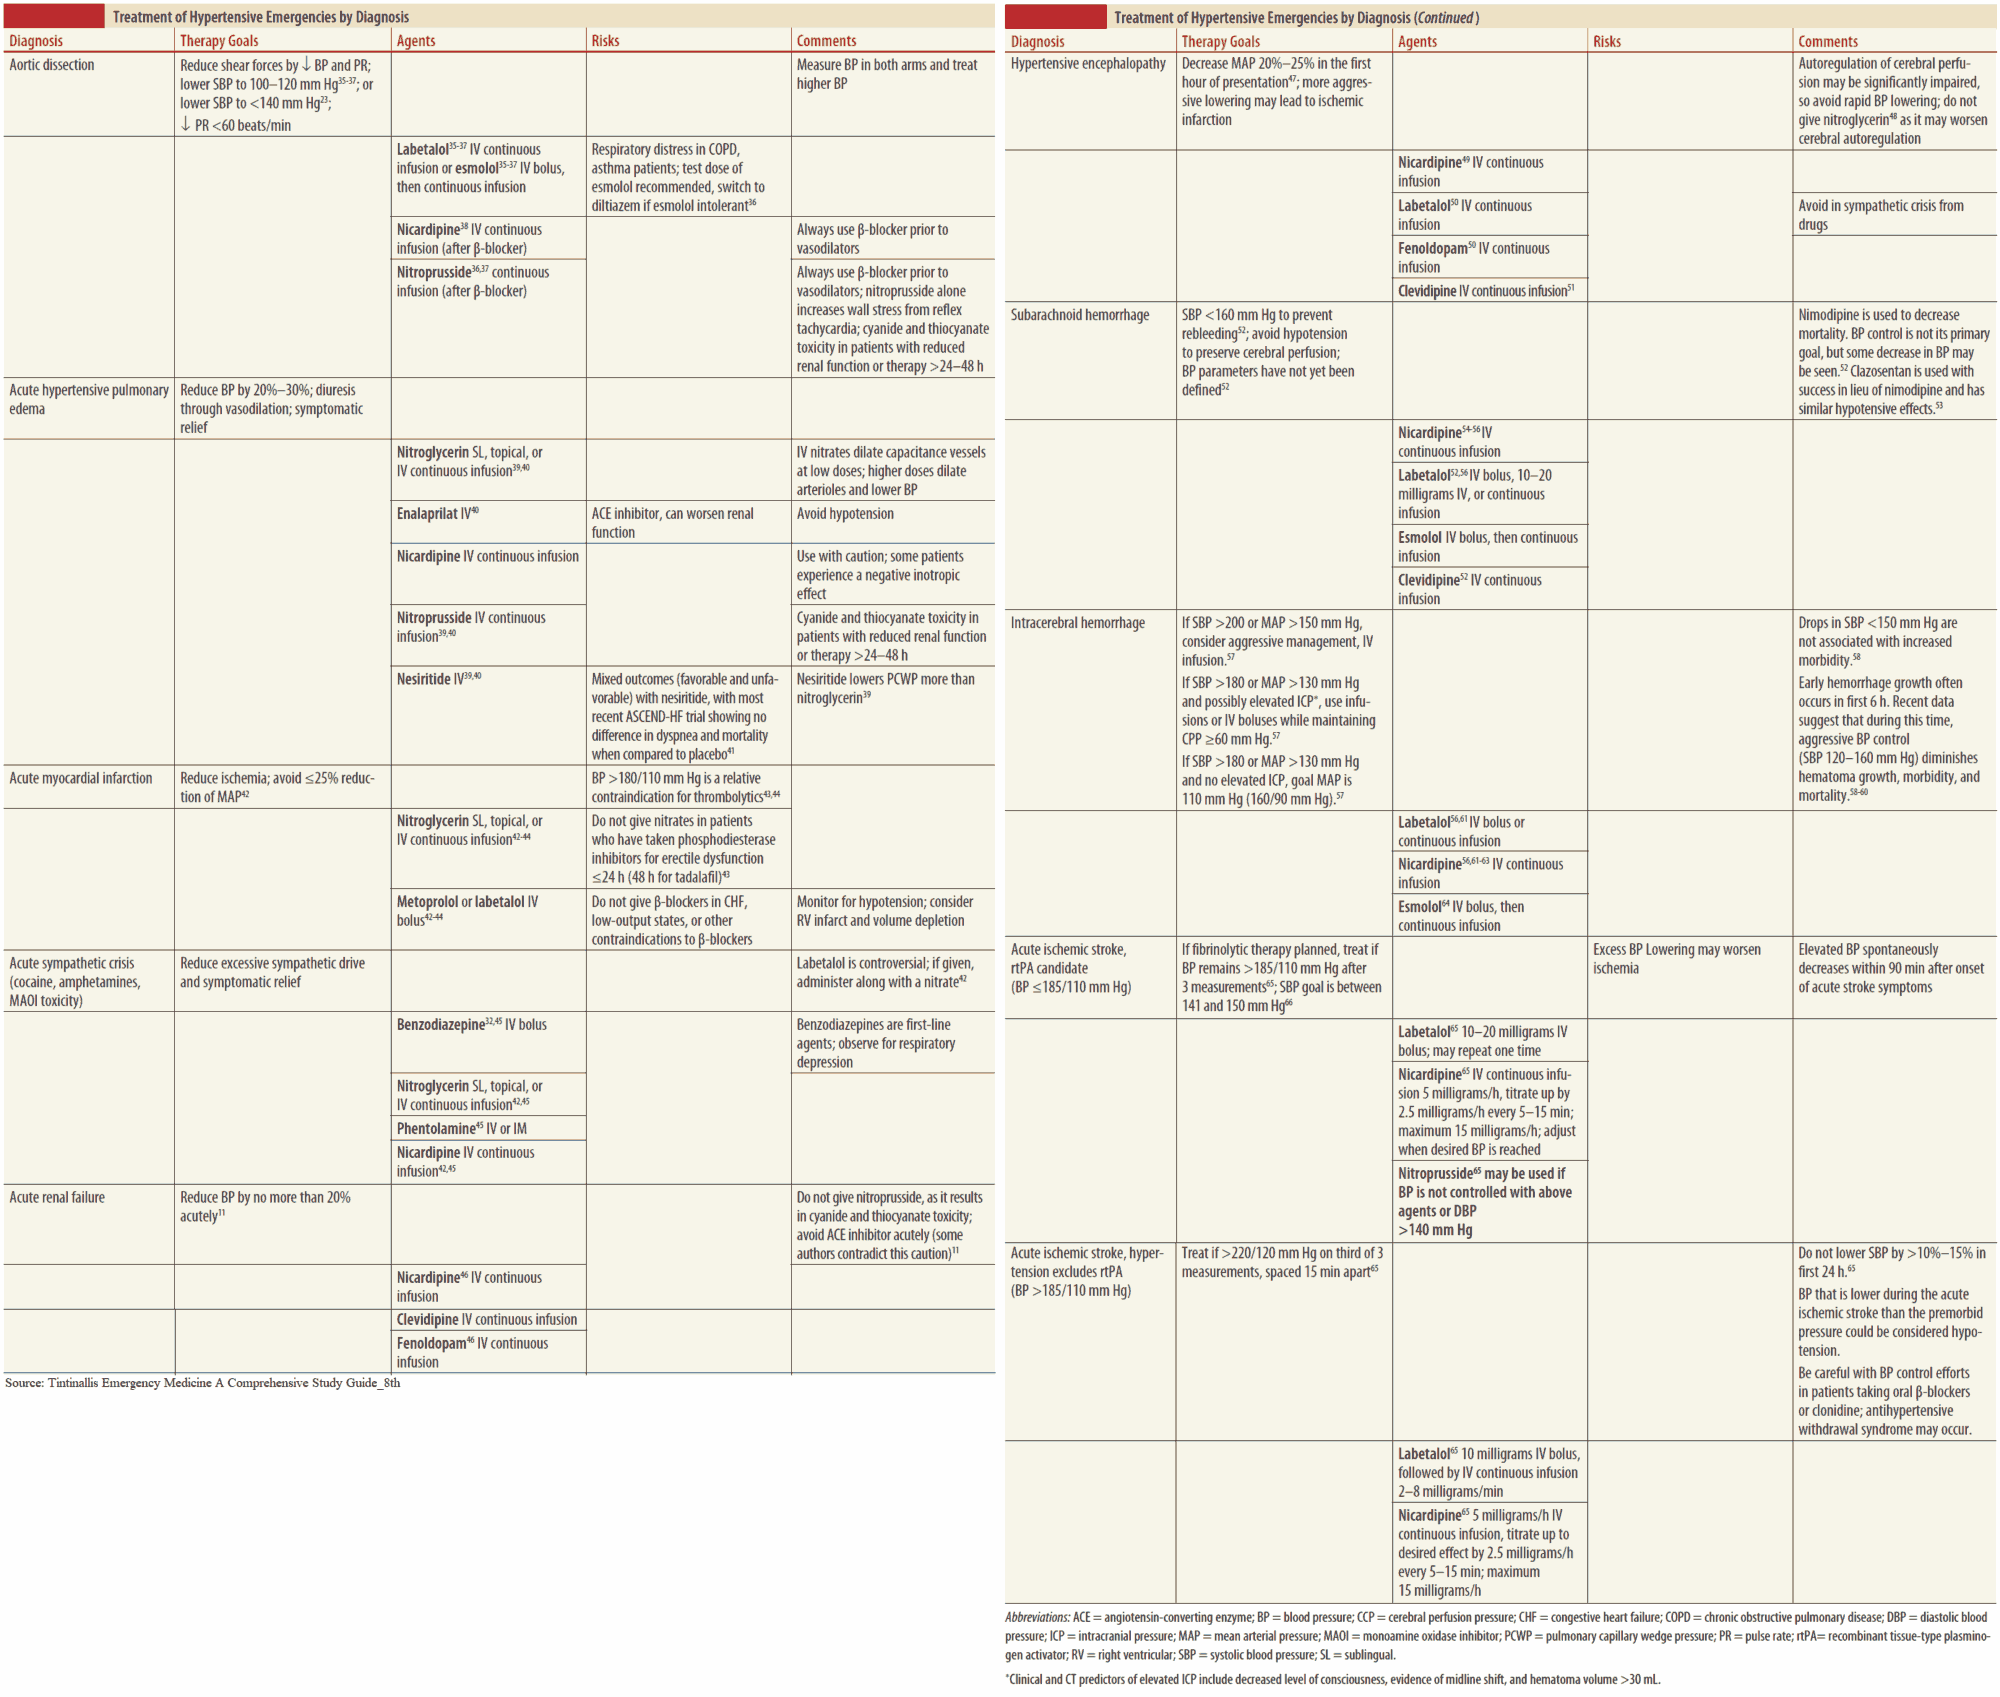 Treatment of Hypertensive Emergencies by Diagnosis